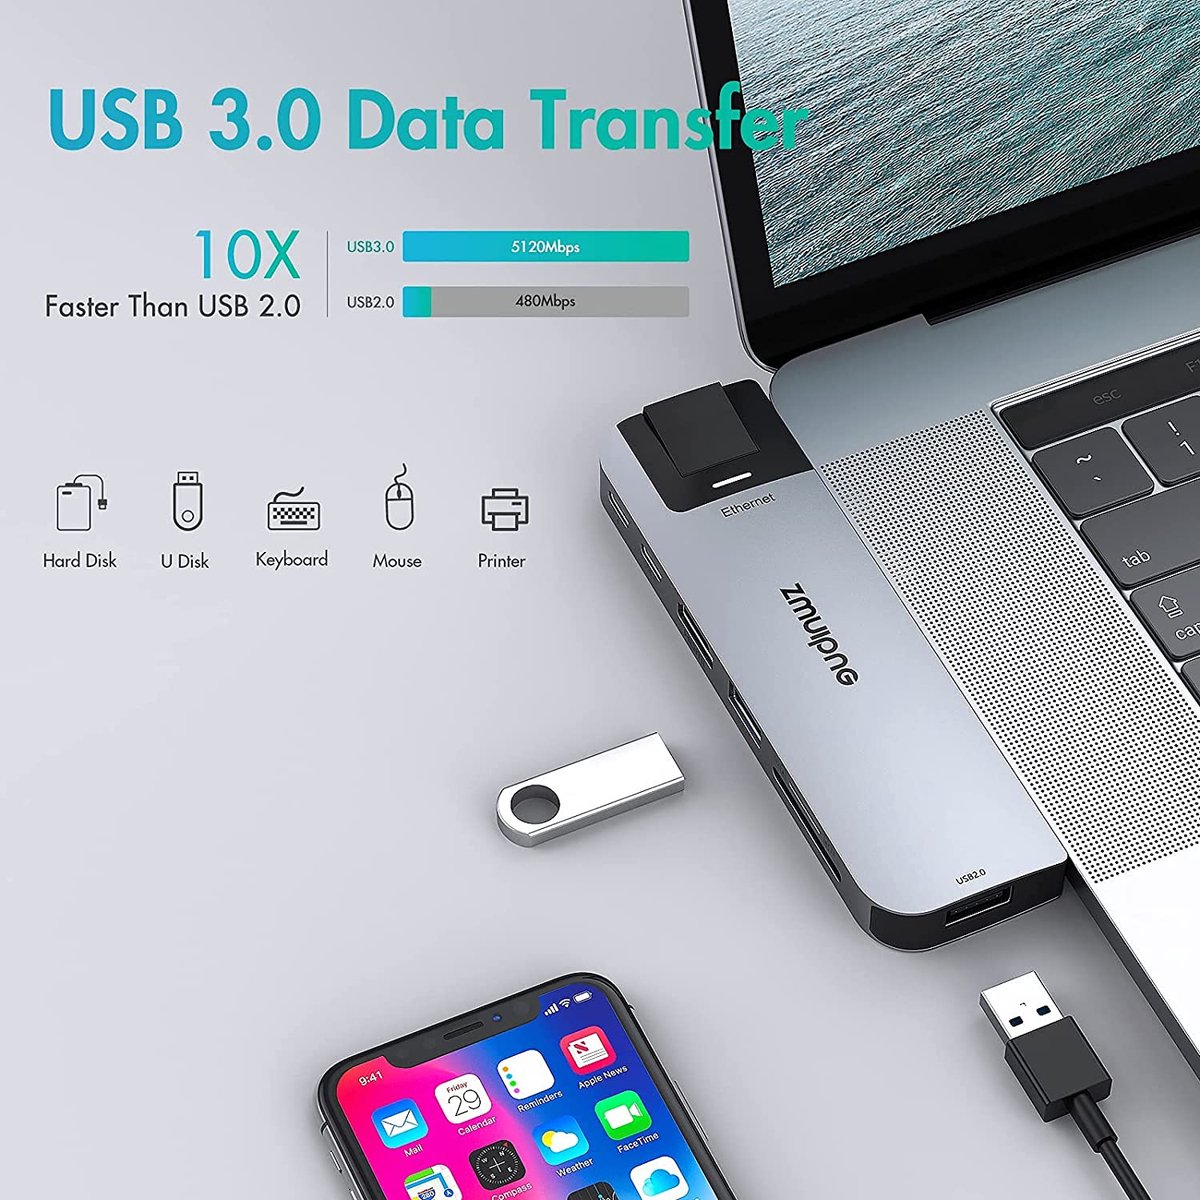 MacBook Pro/MacBook Air USB Accessories with 3 USB 3.0 Ports, TF/SD Card  Reader, Thunderbolt 3 PD Port, USB C Adapter for MacBook Pro 13 15 16  Compatible with MacBook Pro/Air 2021-2016: Buy